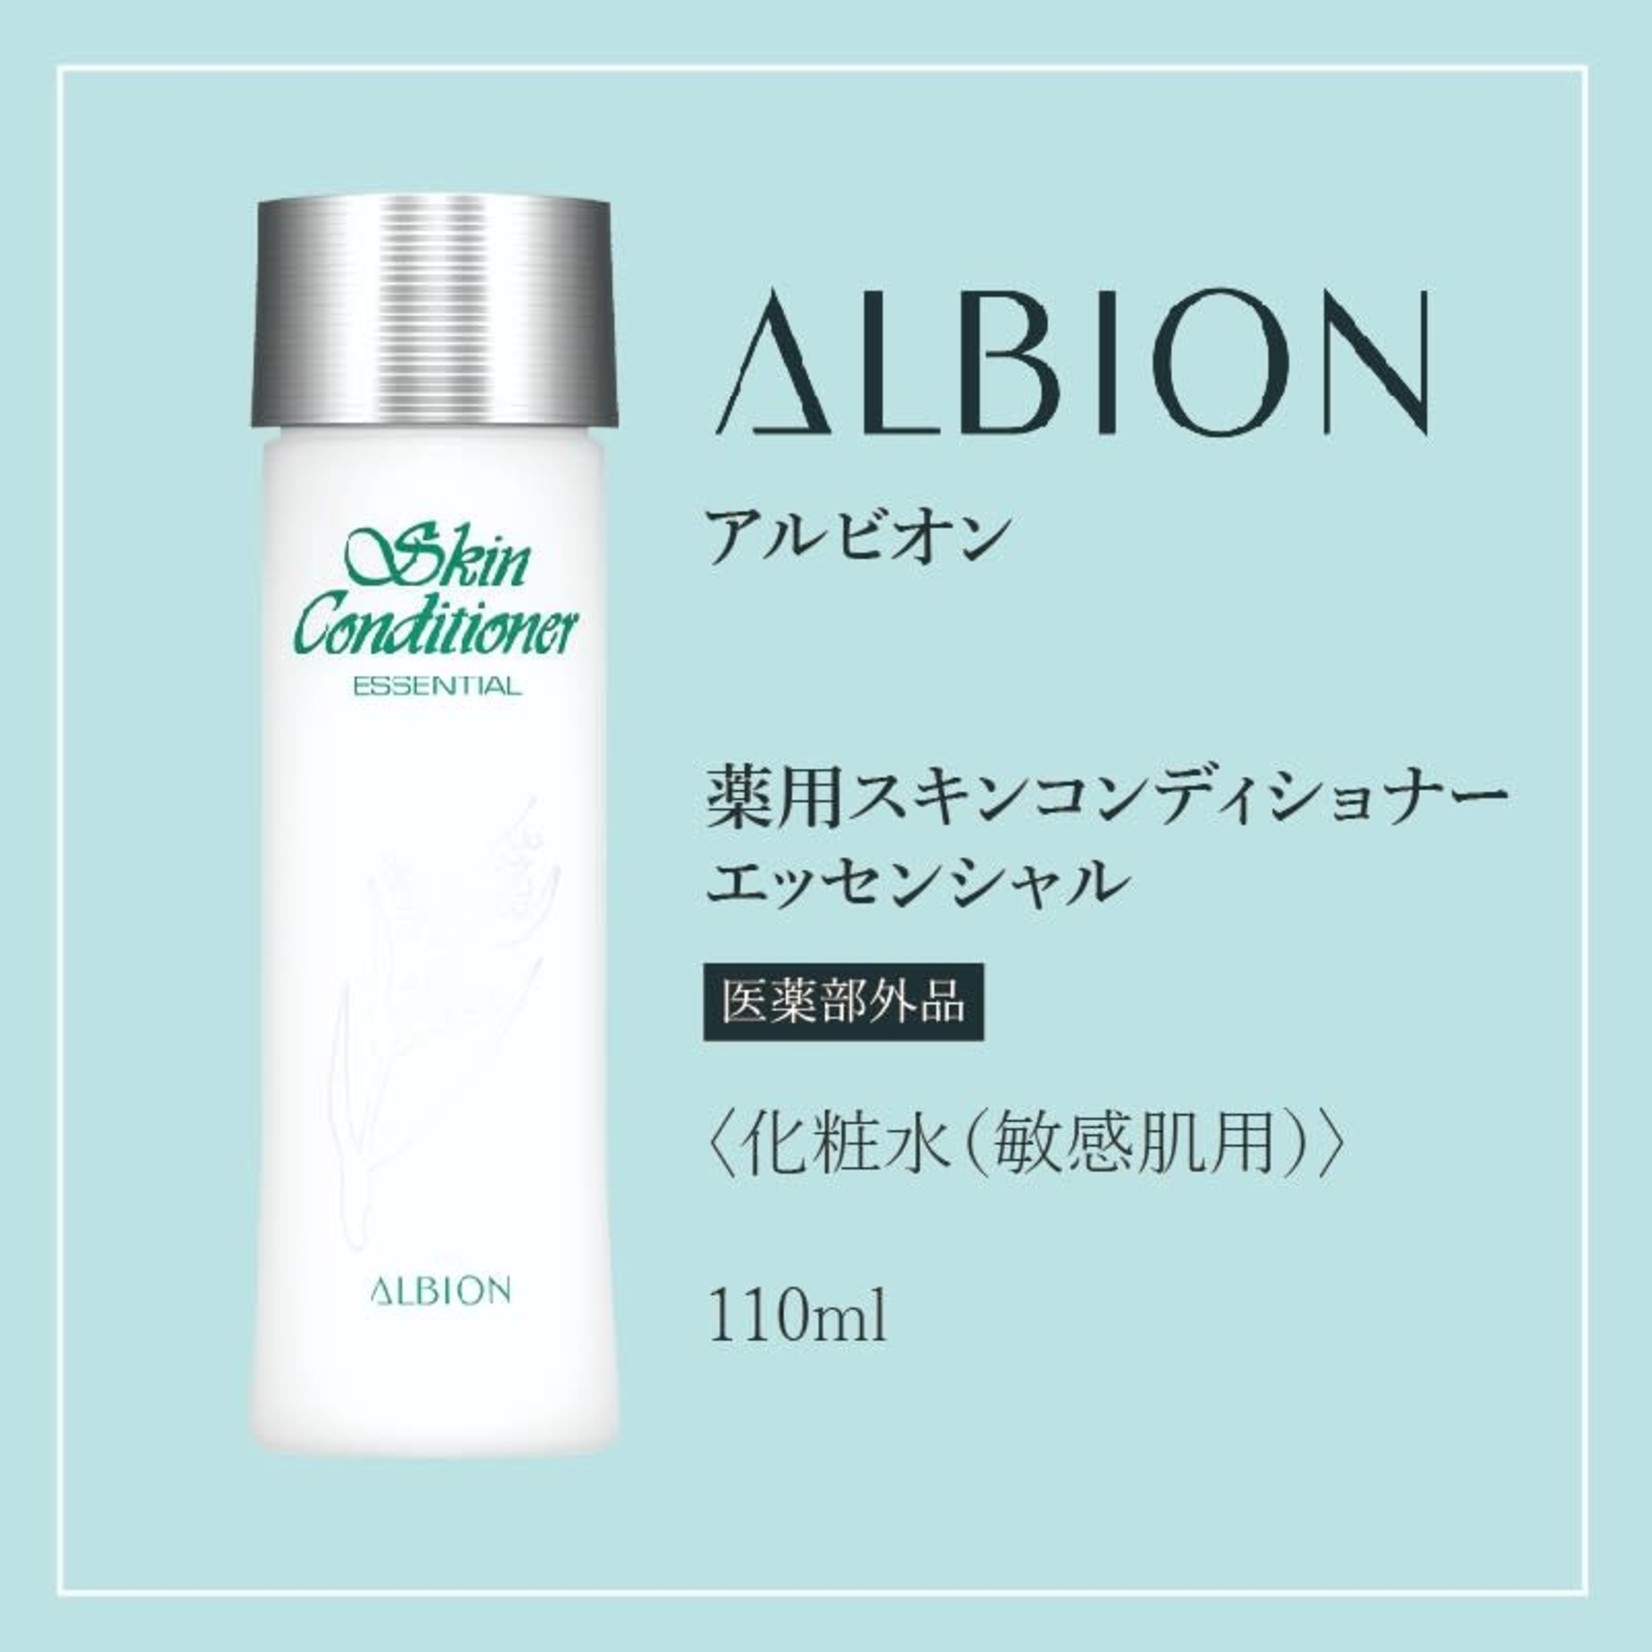 Kanebo Albion Japan Skin Conditioner Essential 110ml